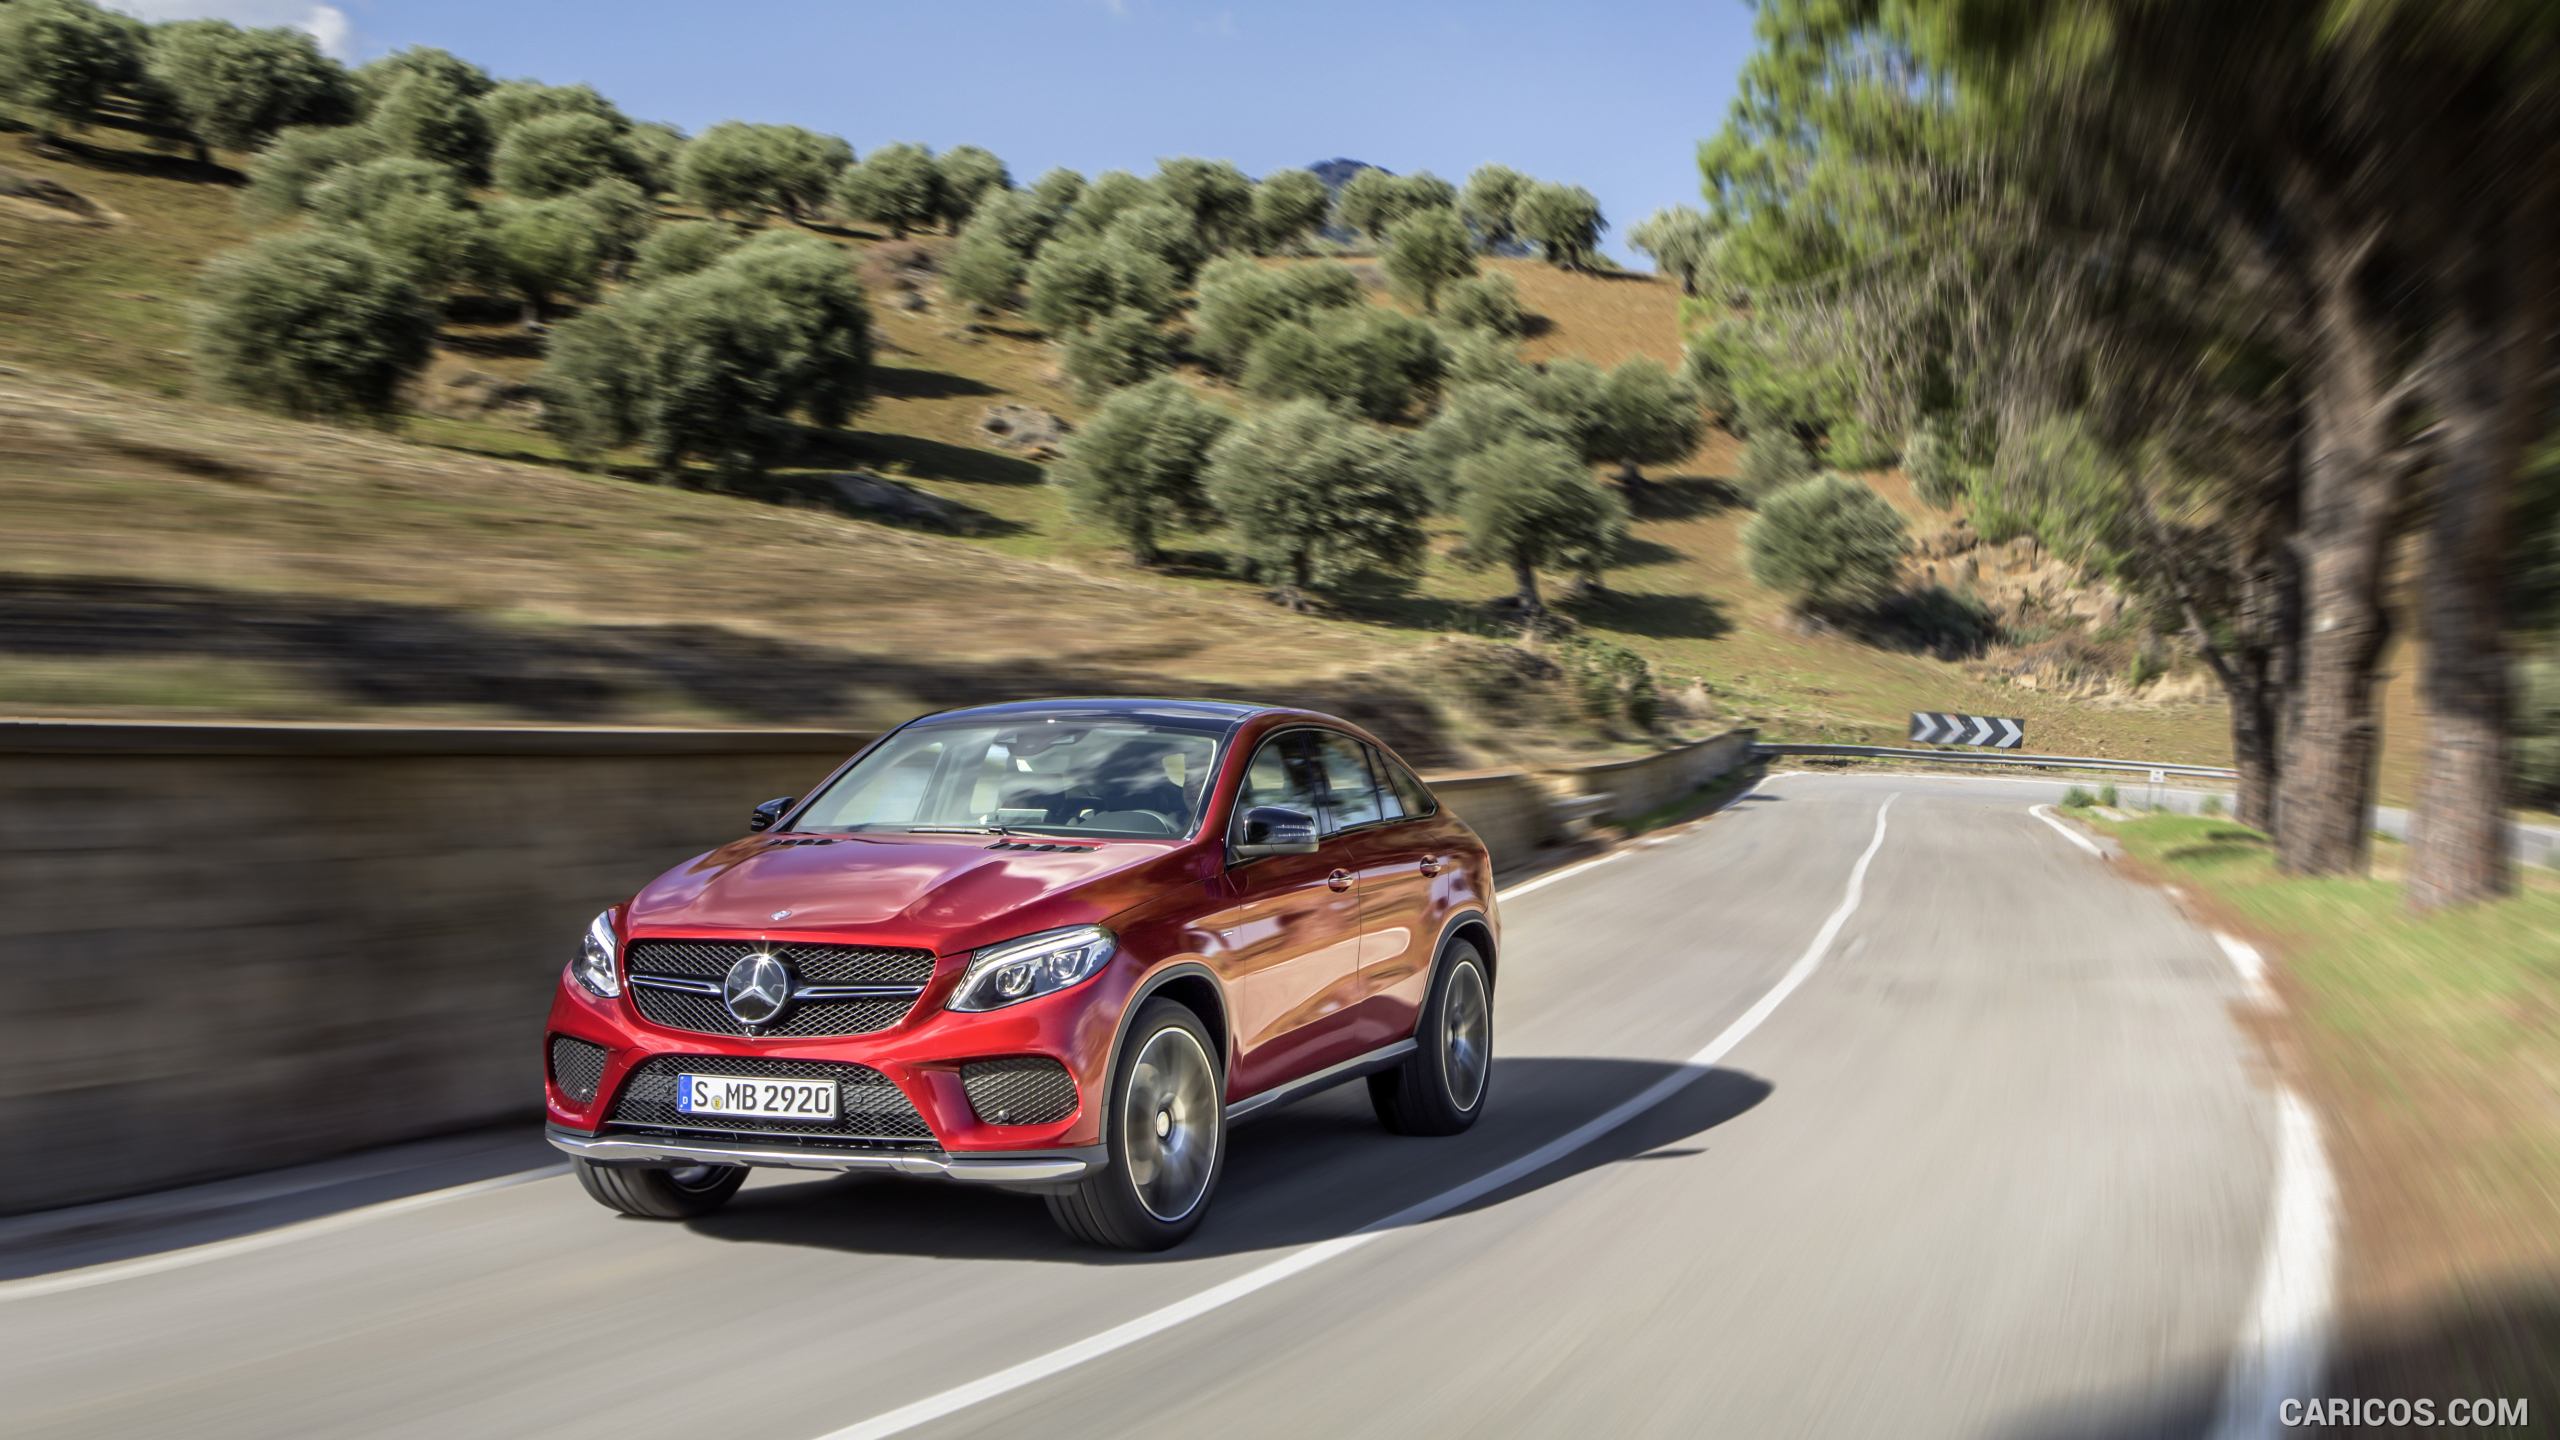 2016 Mercedes-Benz GLE 450 AMG Coupe 4MATIC (Designo Hyacinth Red Metallic) - Front, #27 of 115